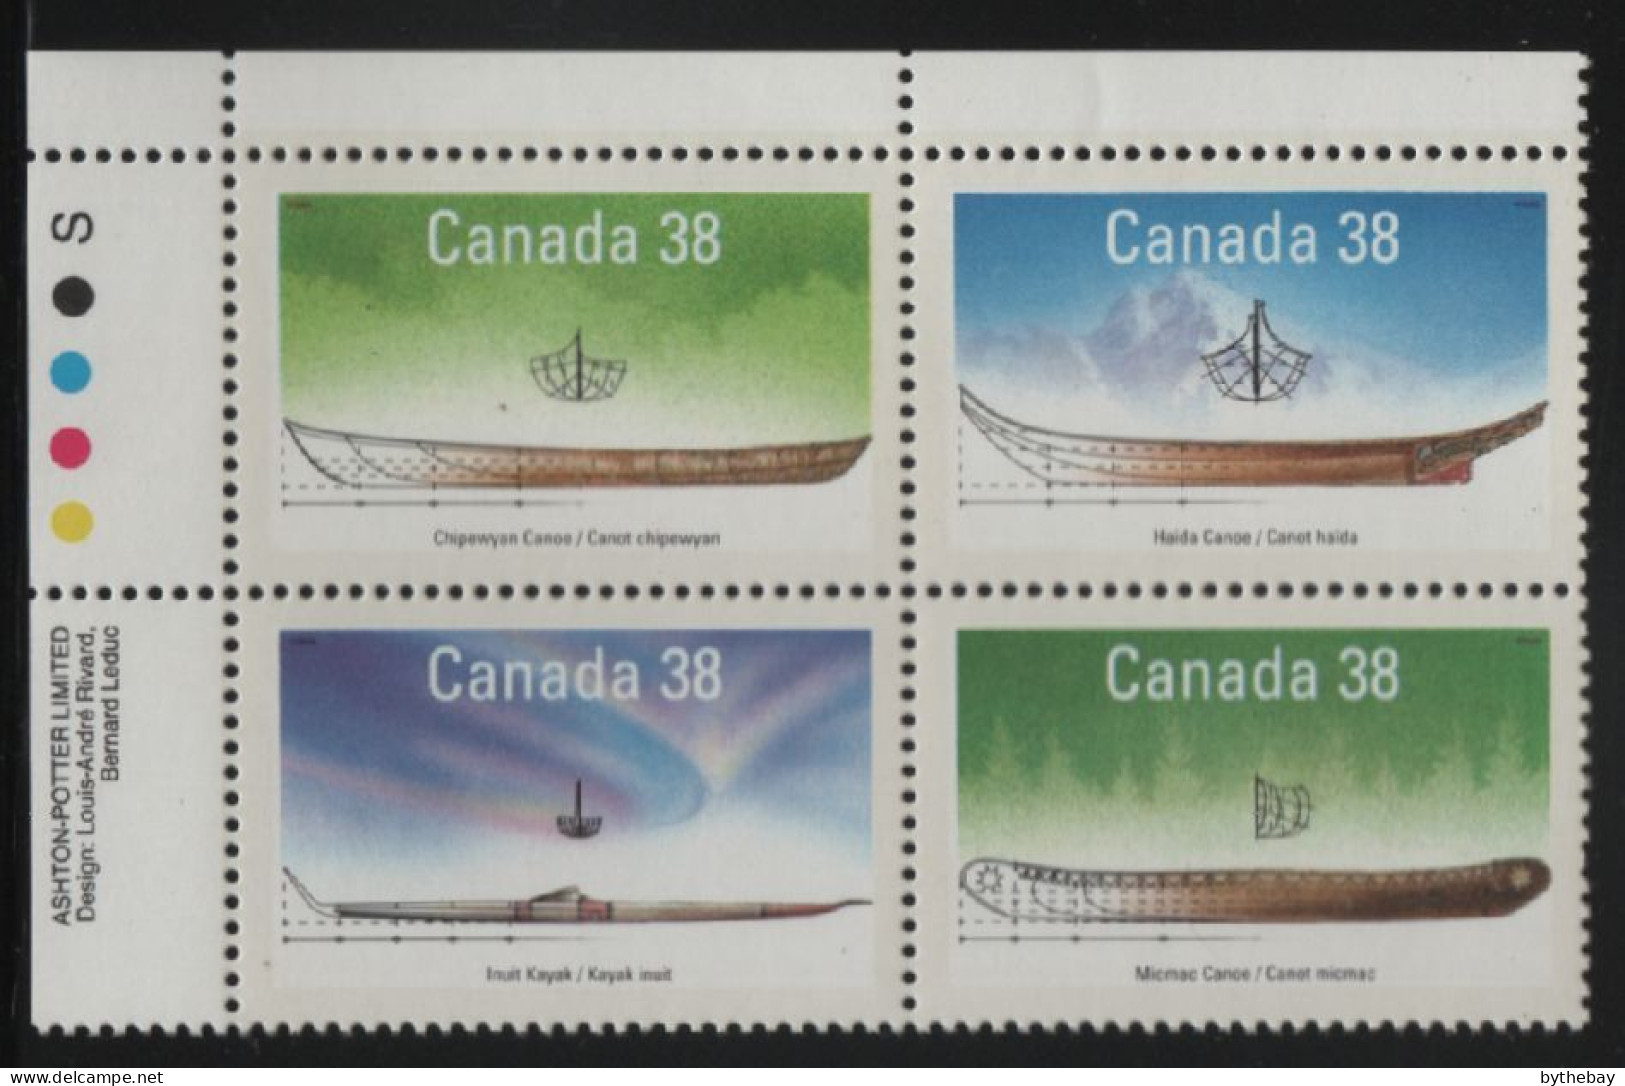 Canada 1989 MNH Sc 1232a 38c Native Boats UL Plate Block - Num. Planches & Inscriptions Marge